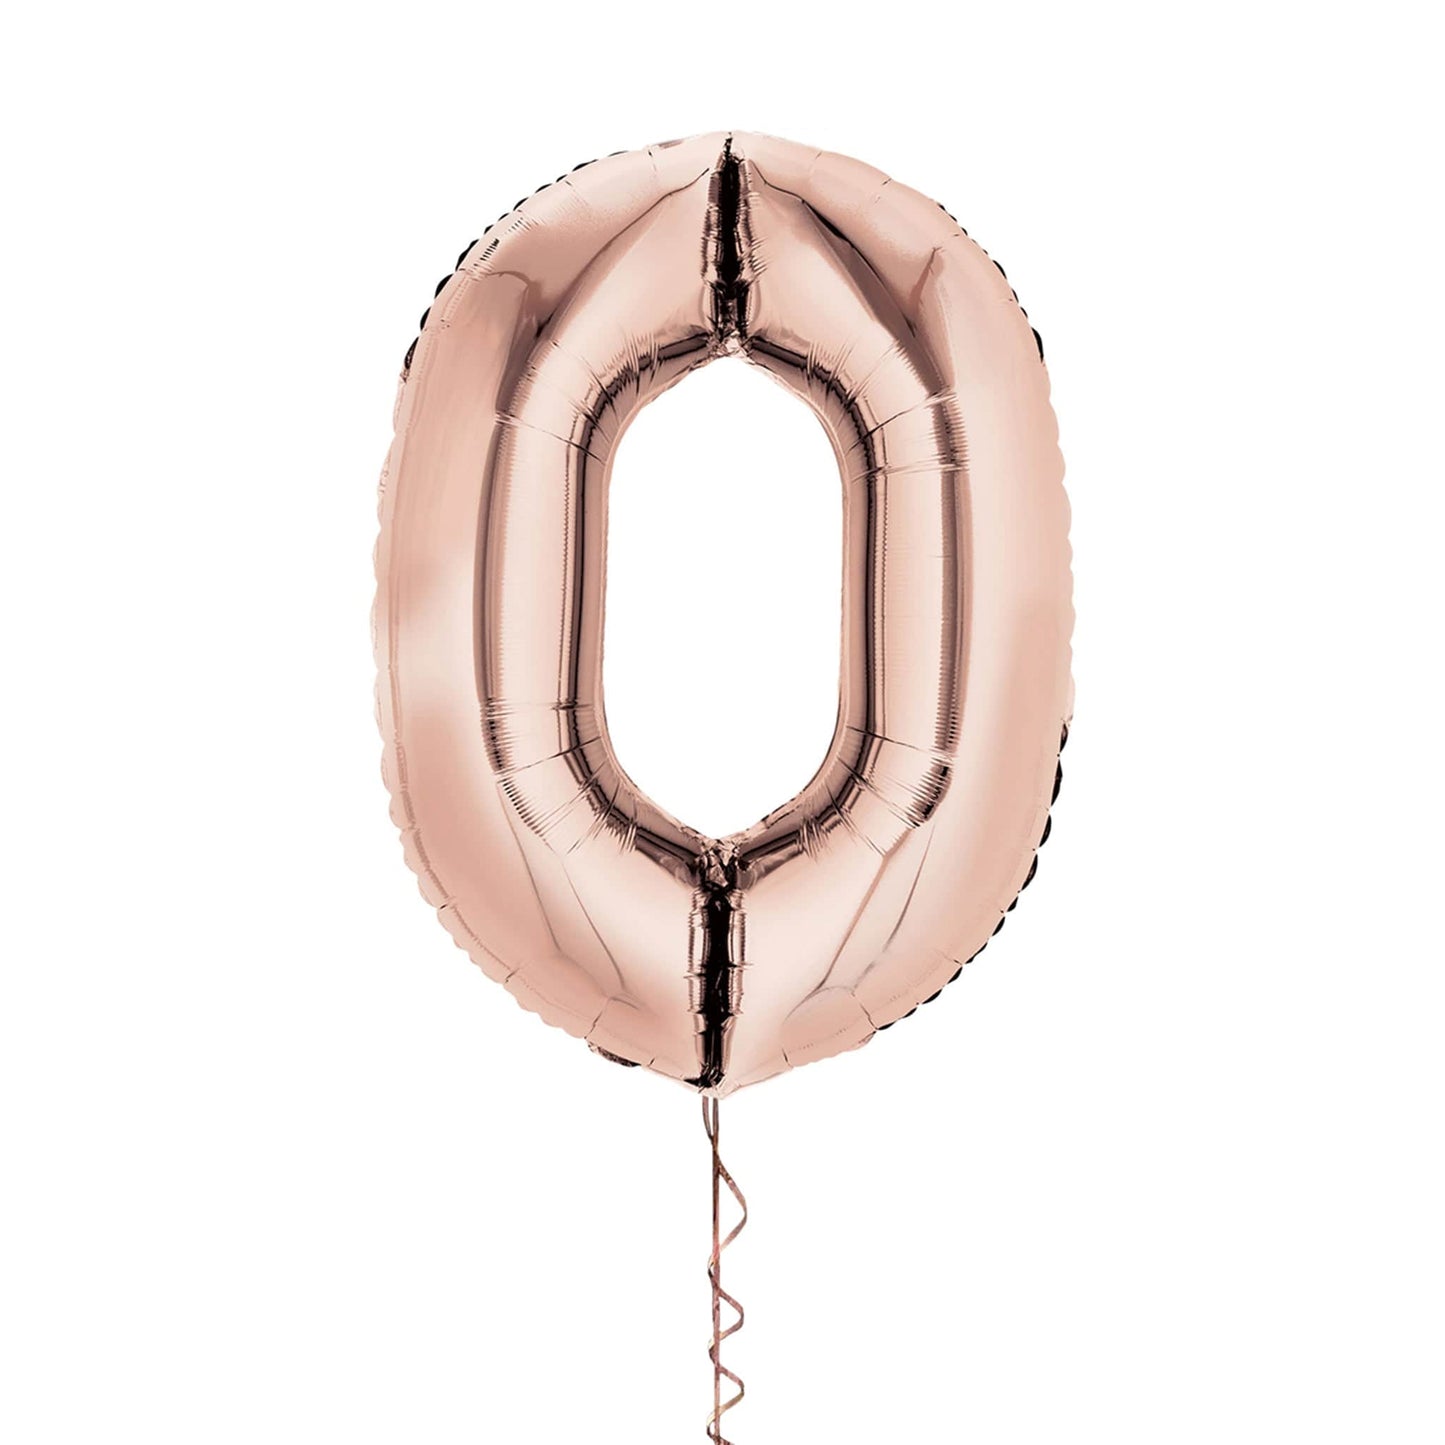 Castle Balloons 0 Rose Gold Giant Helium Numbers